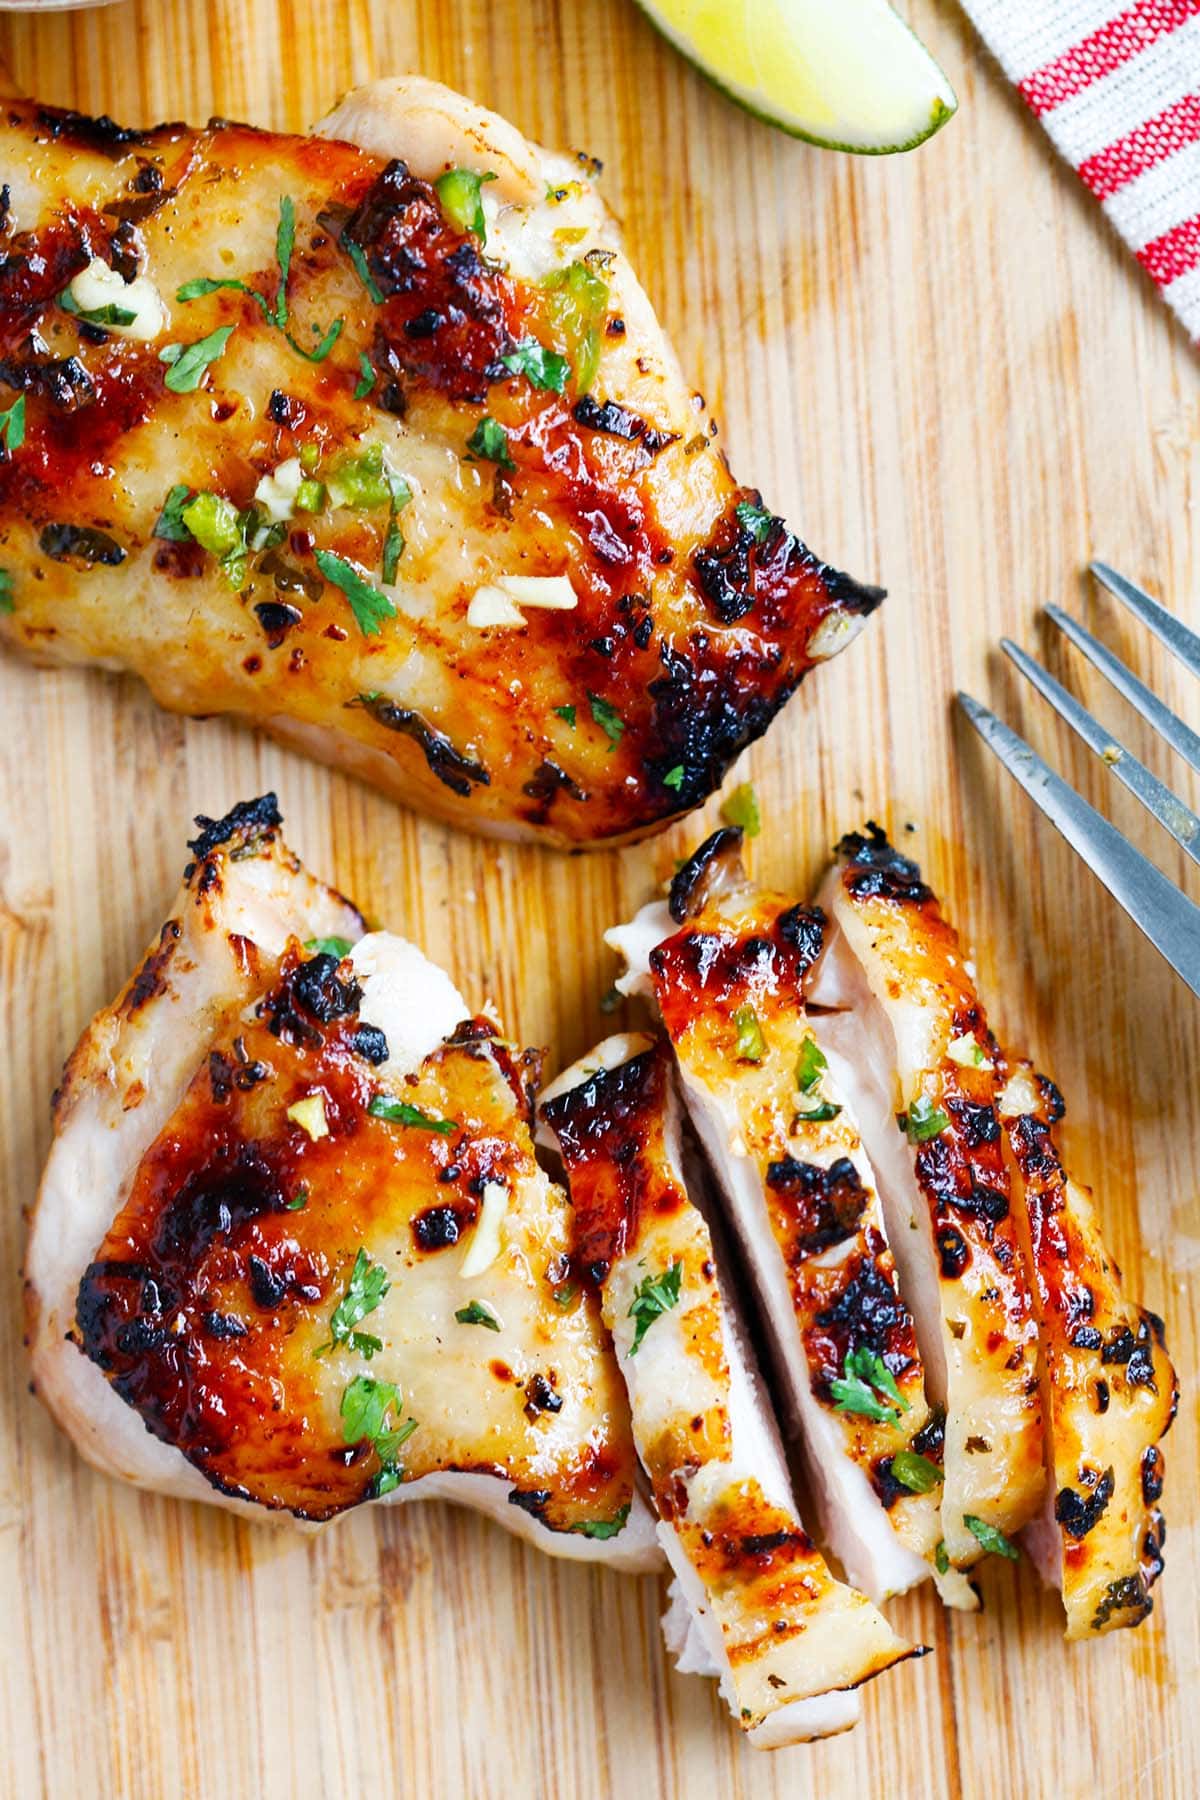 Delicious chili lime grilled chicken on a wooden chopping board.